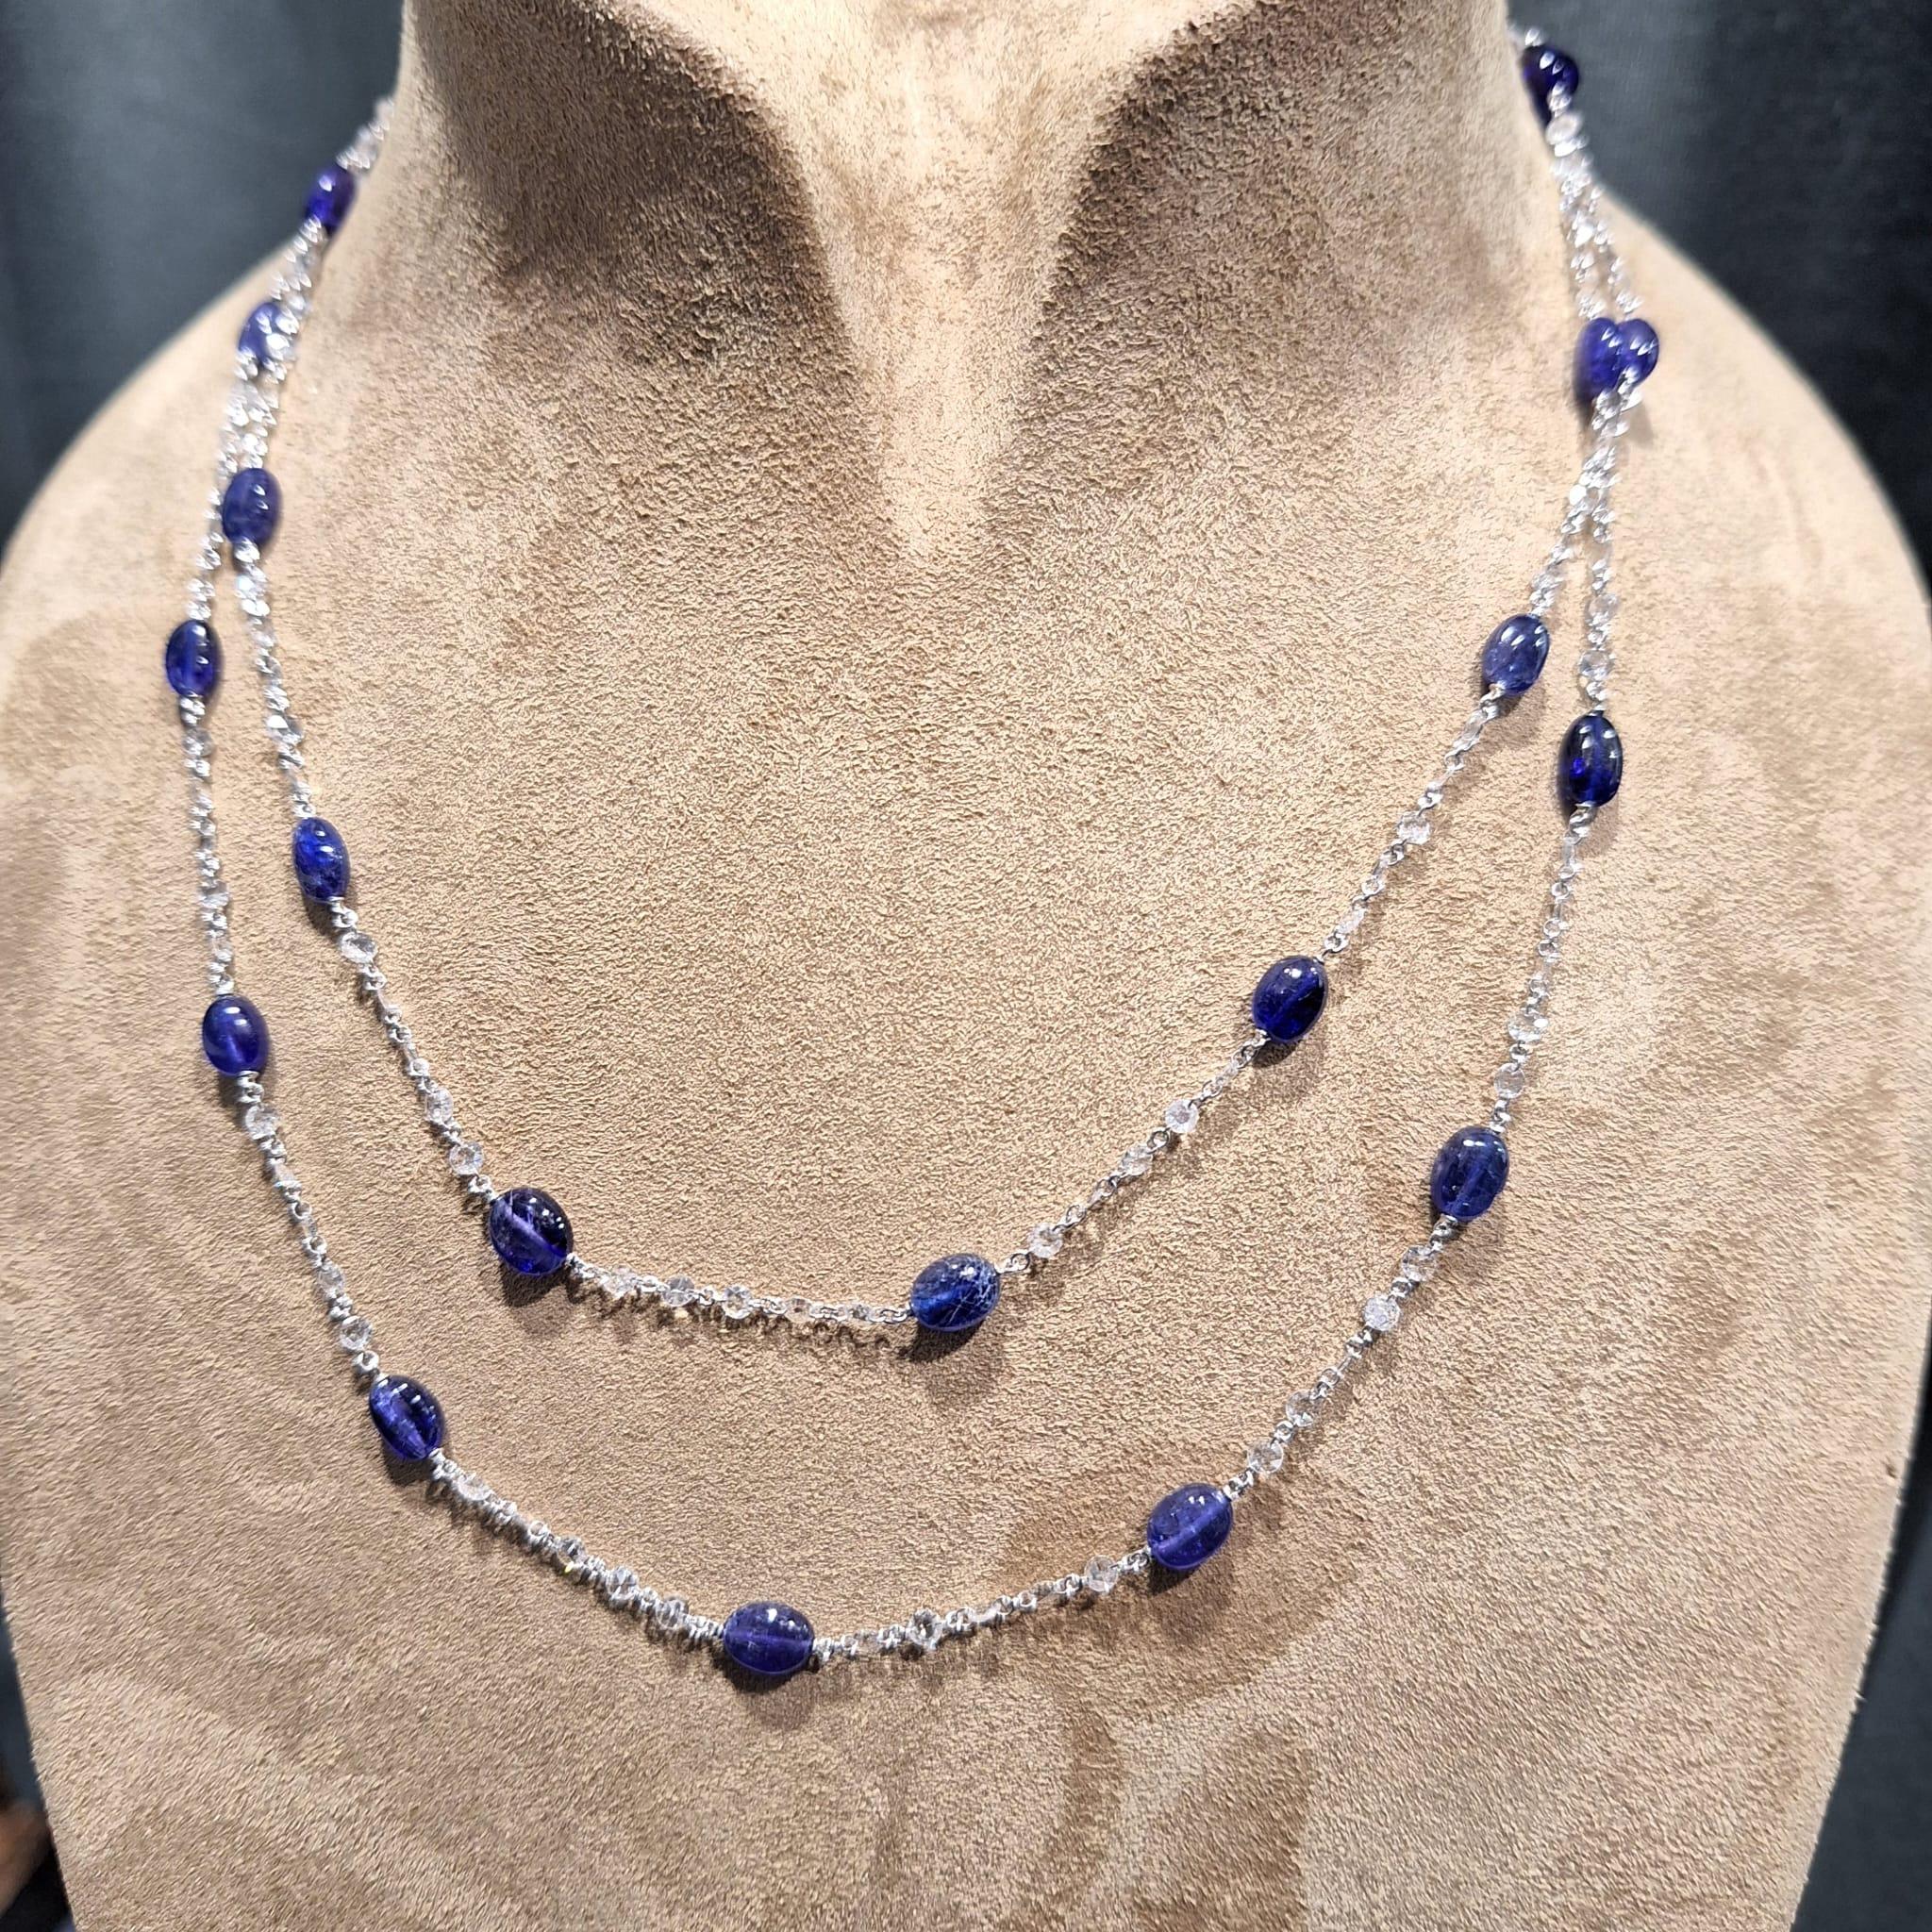 18K White Gold Diamond Necklace with Tanzanite

Tanzanite is a transformative gemstone that facilitates inner calm, dissolves old patterns, and stimulates psychic abilities and higher consciousness.

Diamonds symbolise clarity and purity, also